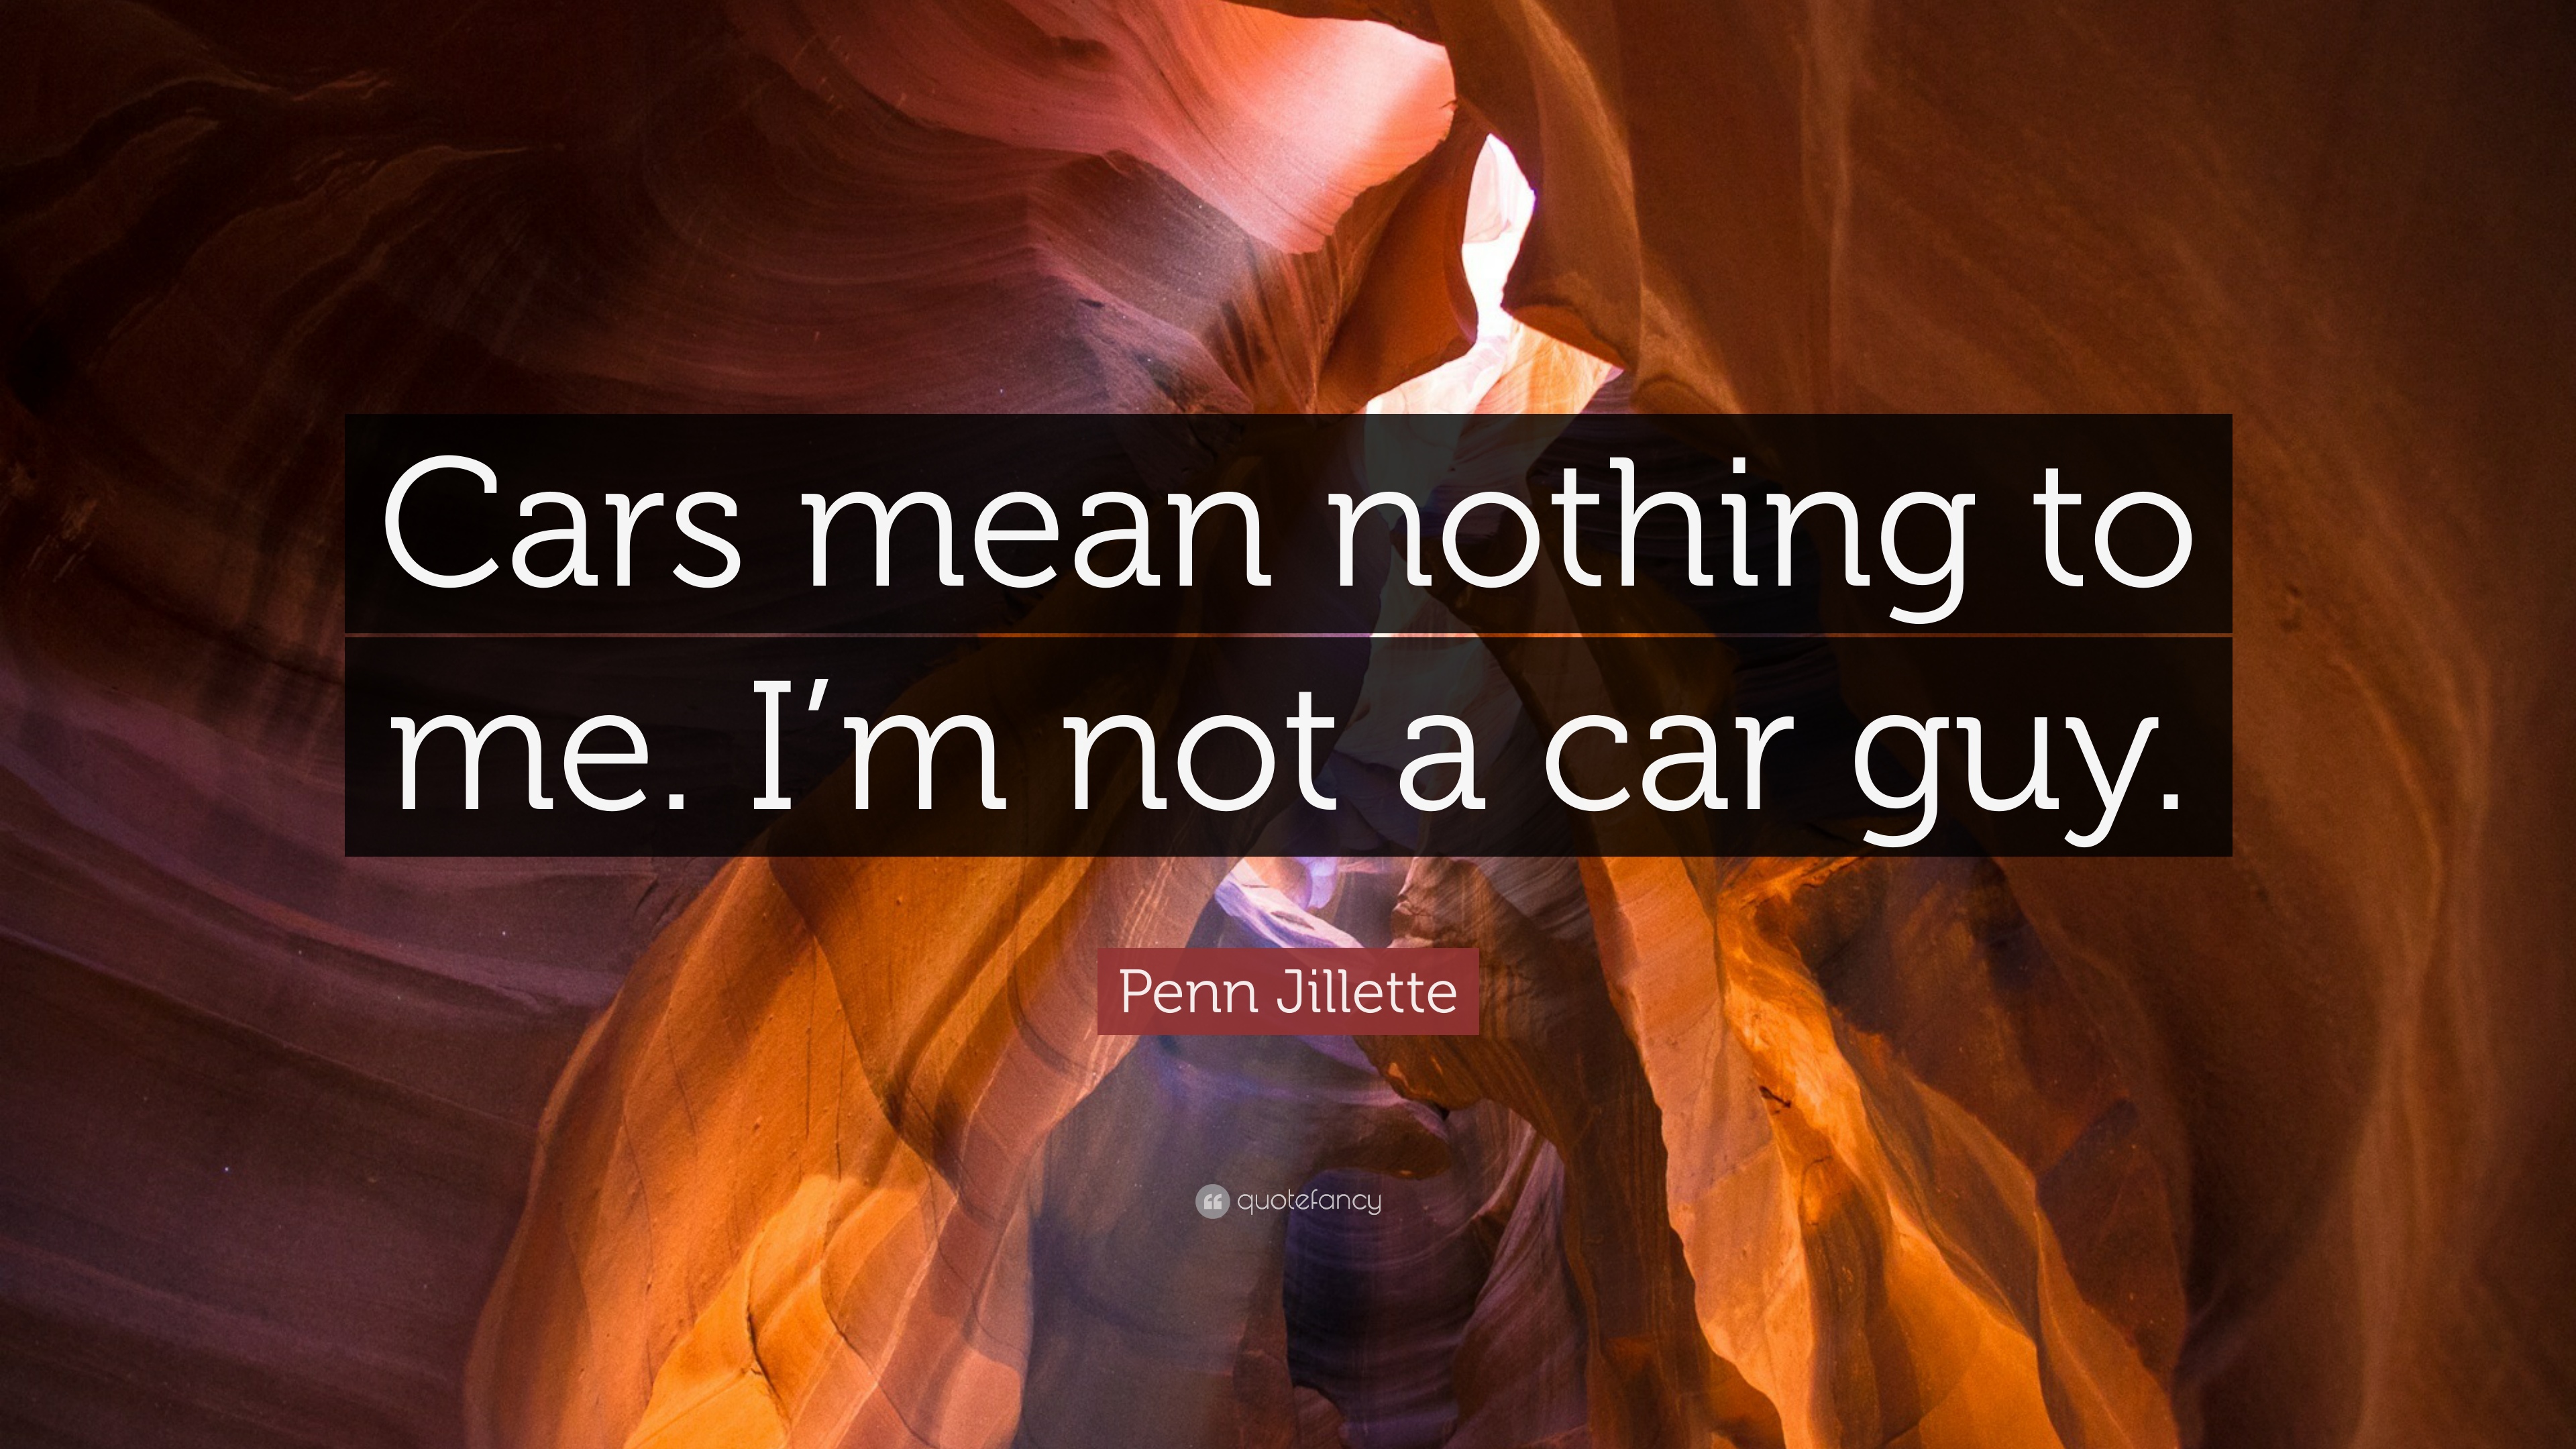 Penn Jillette Quote: “Cars mean nothing to me. I'm not a car guy